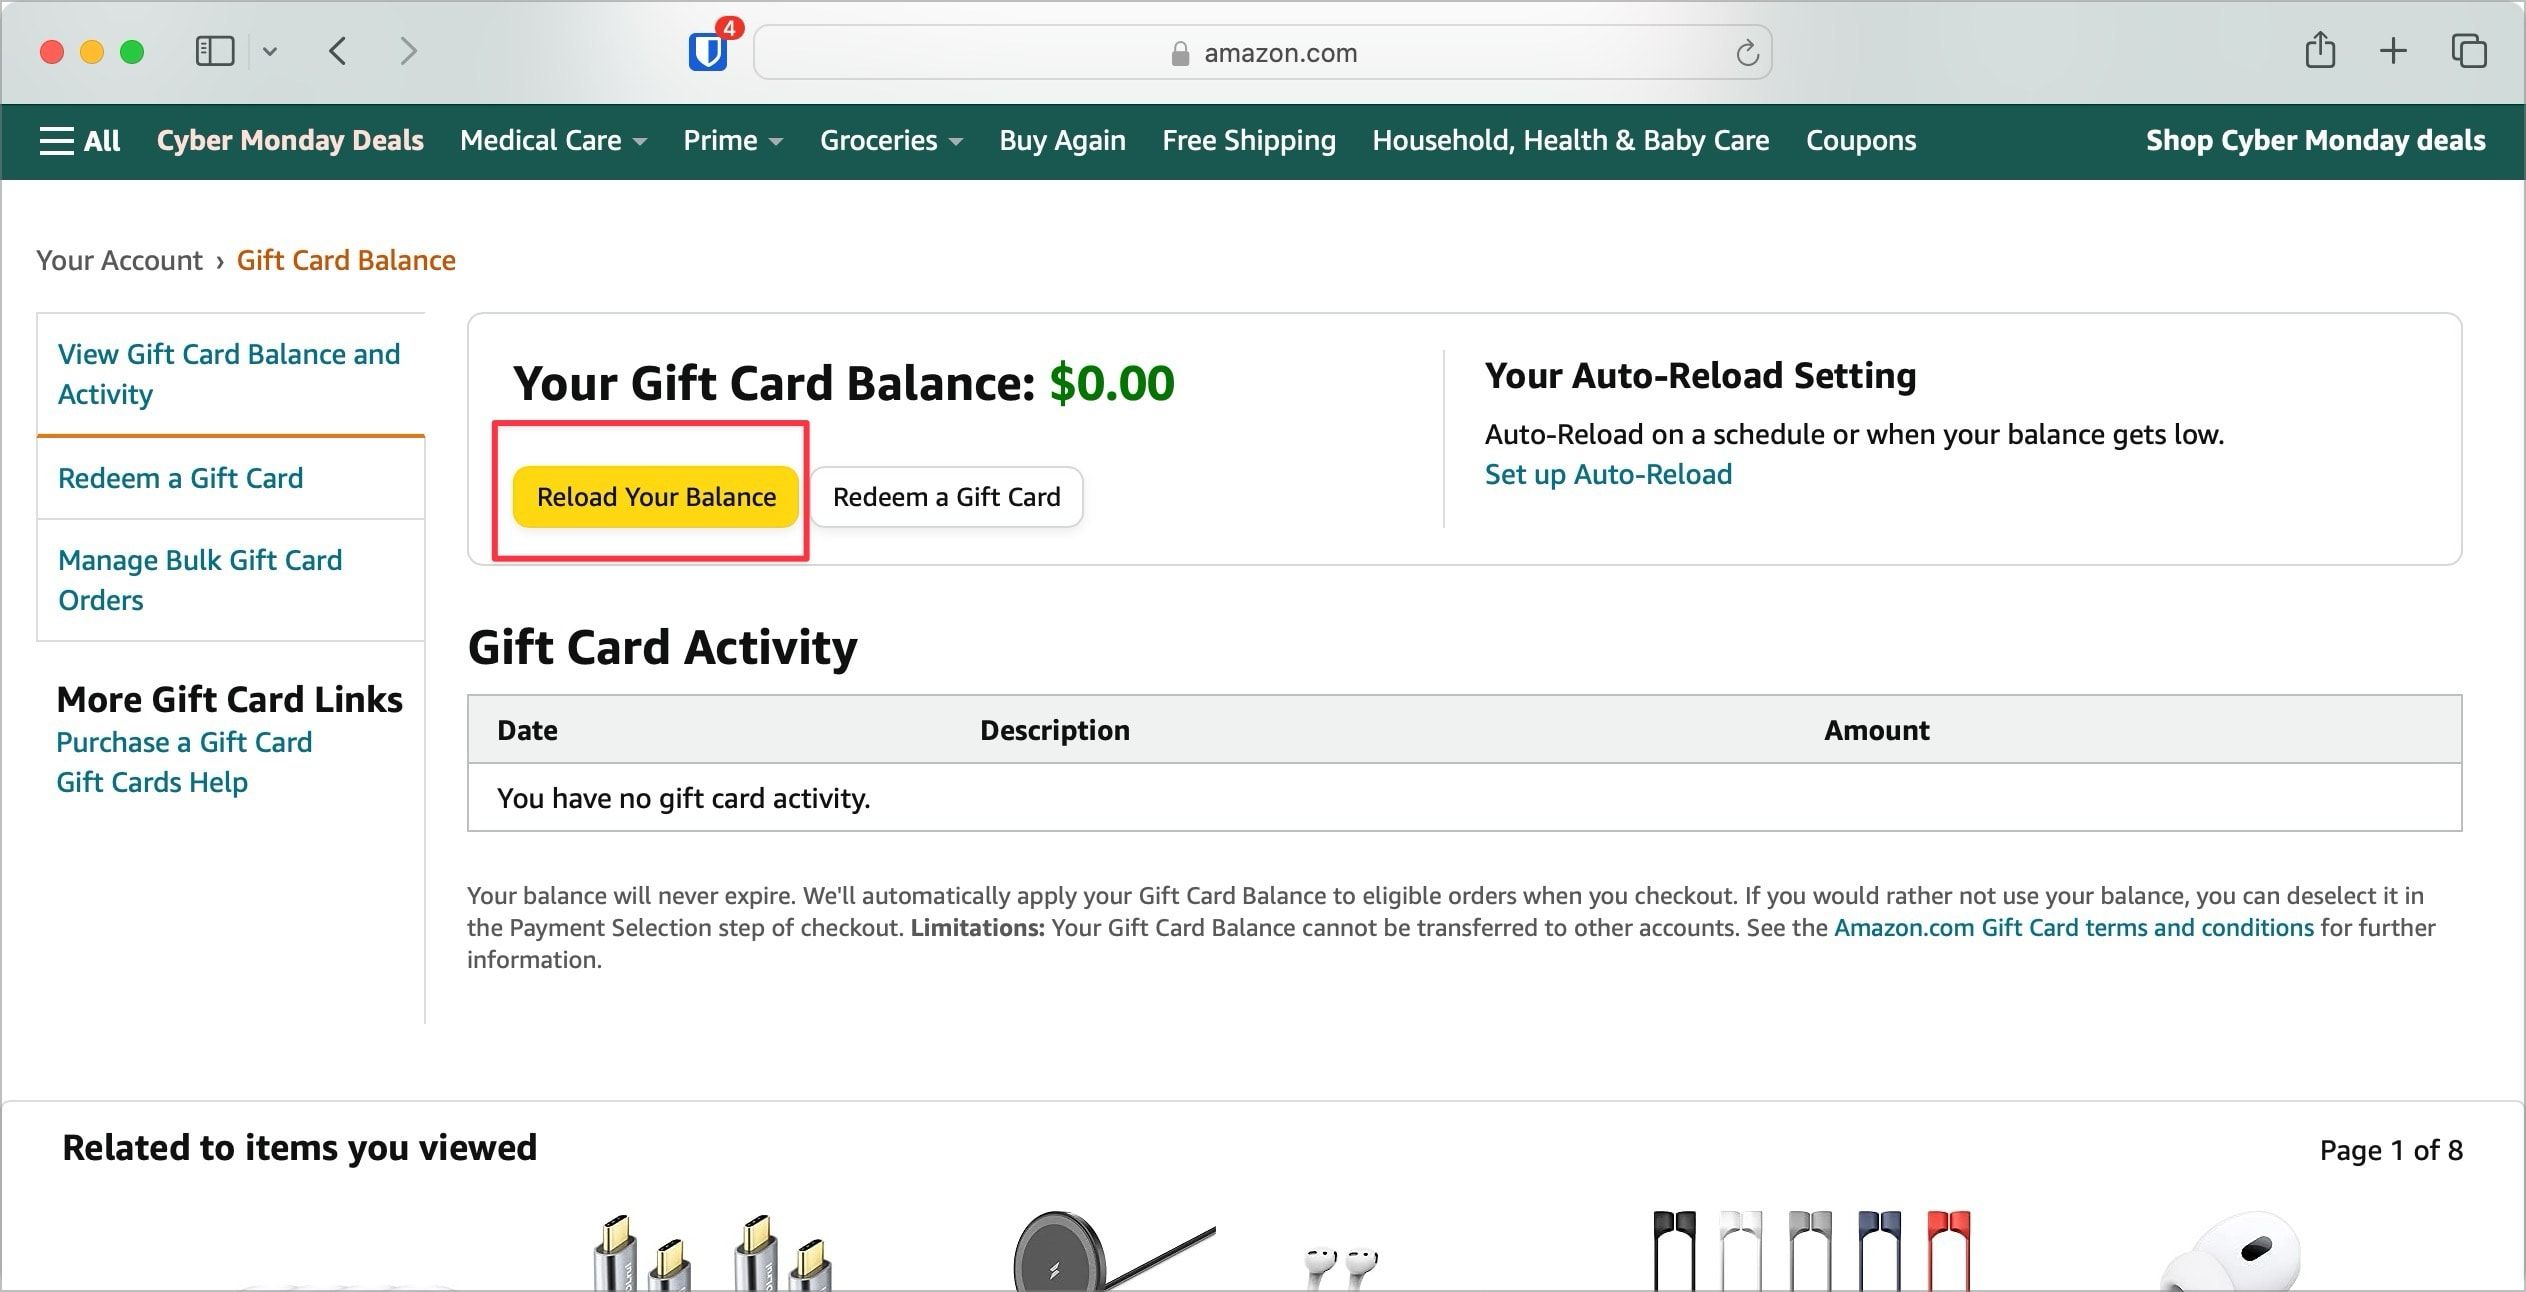 Can I transfer my Amazon gift card to Google Pay? - Quora